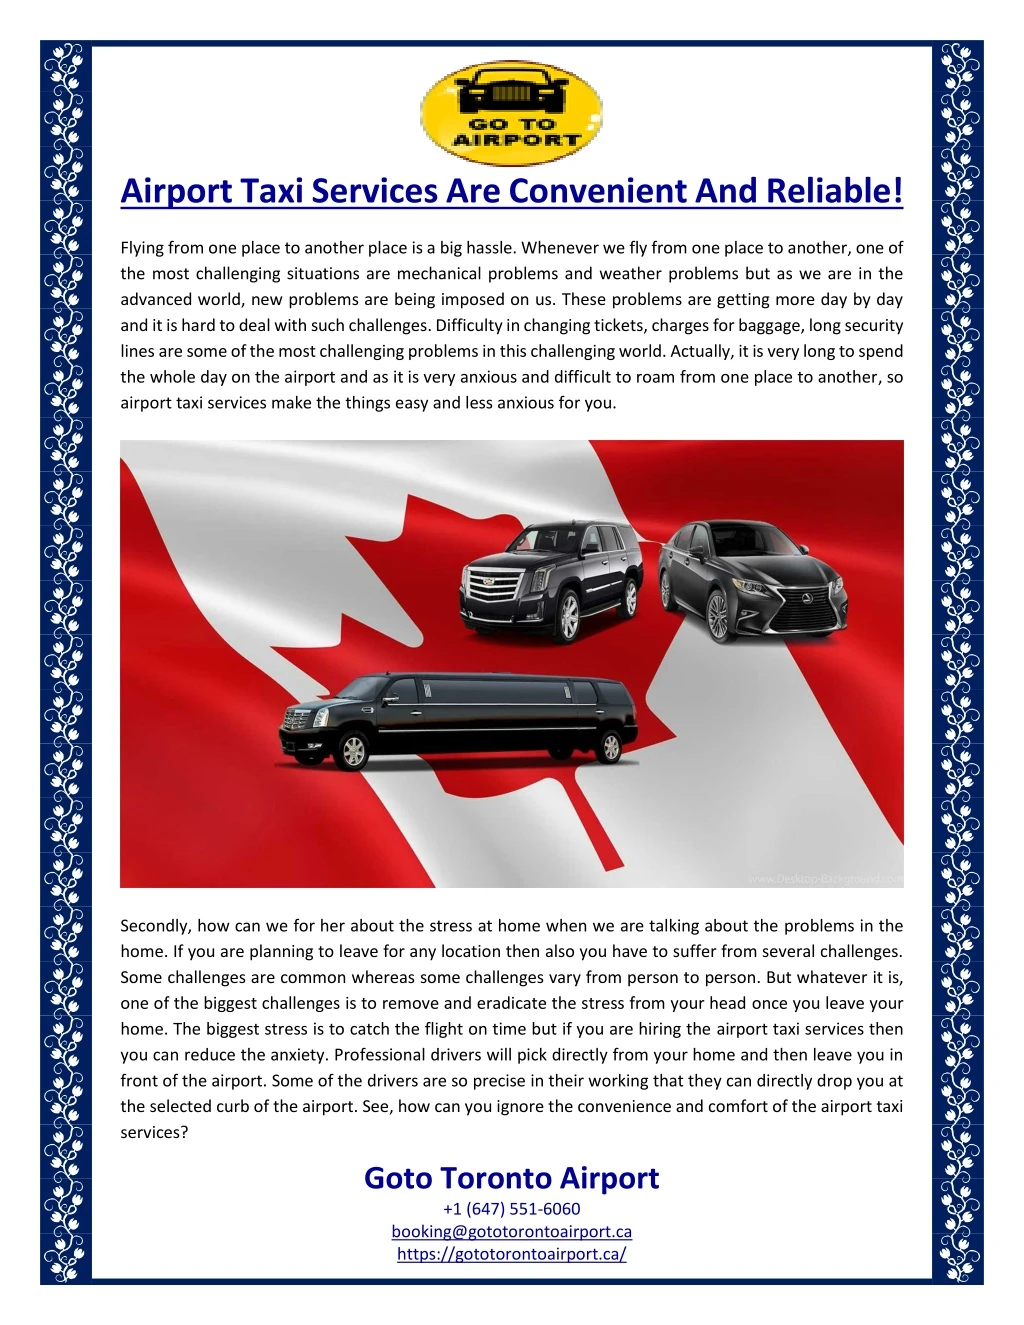 airport taxi services are convenient and reliable